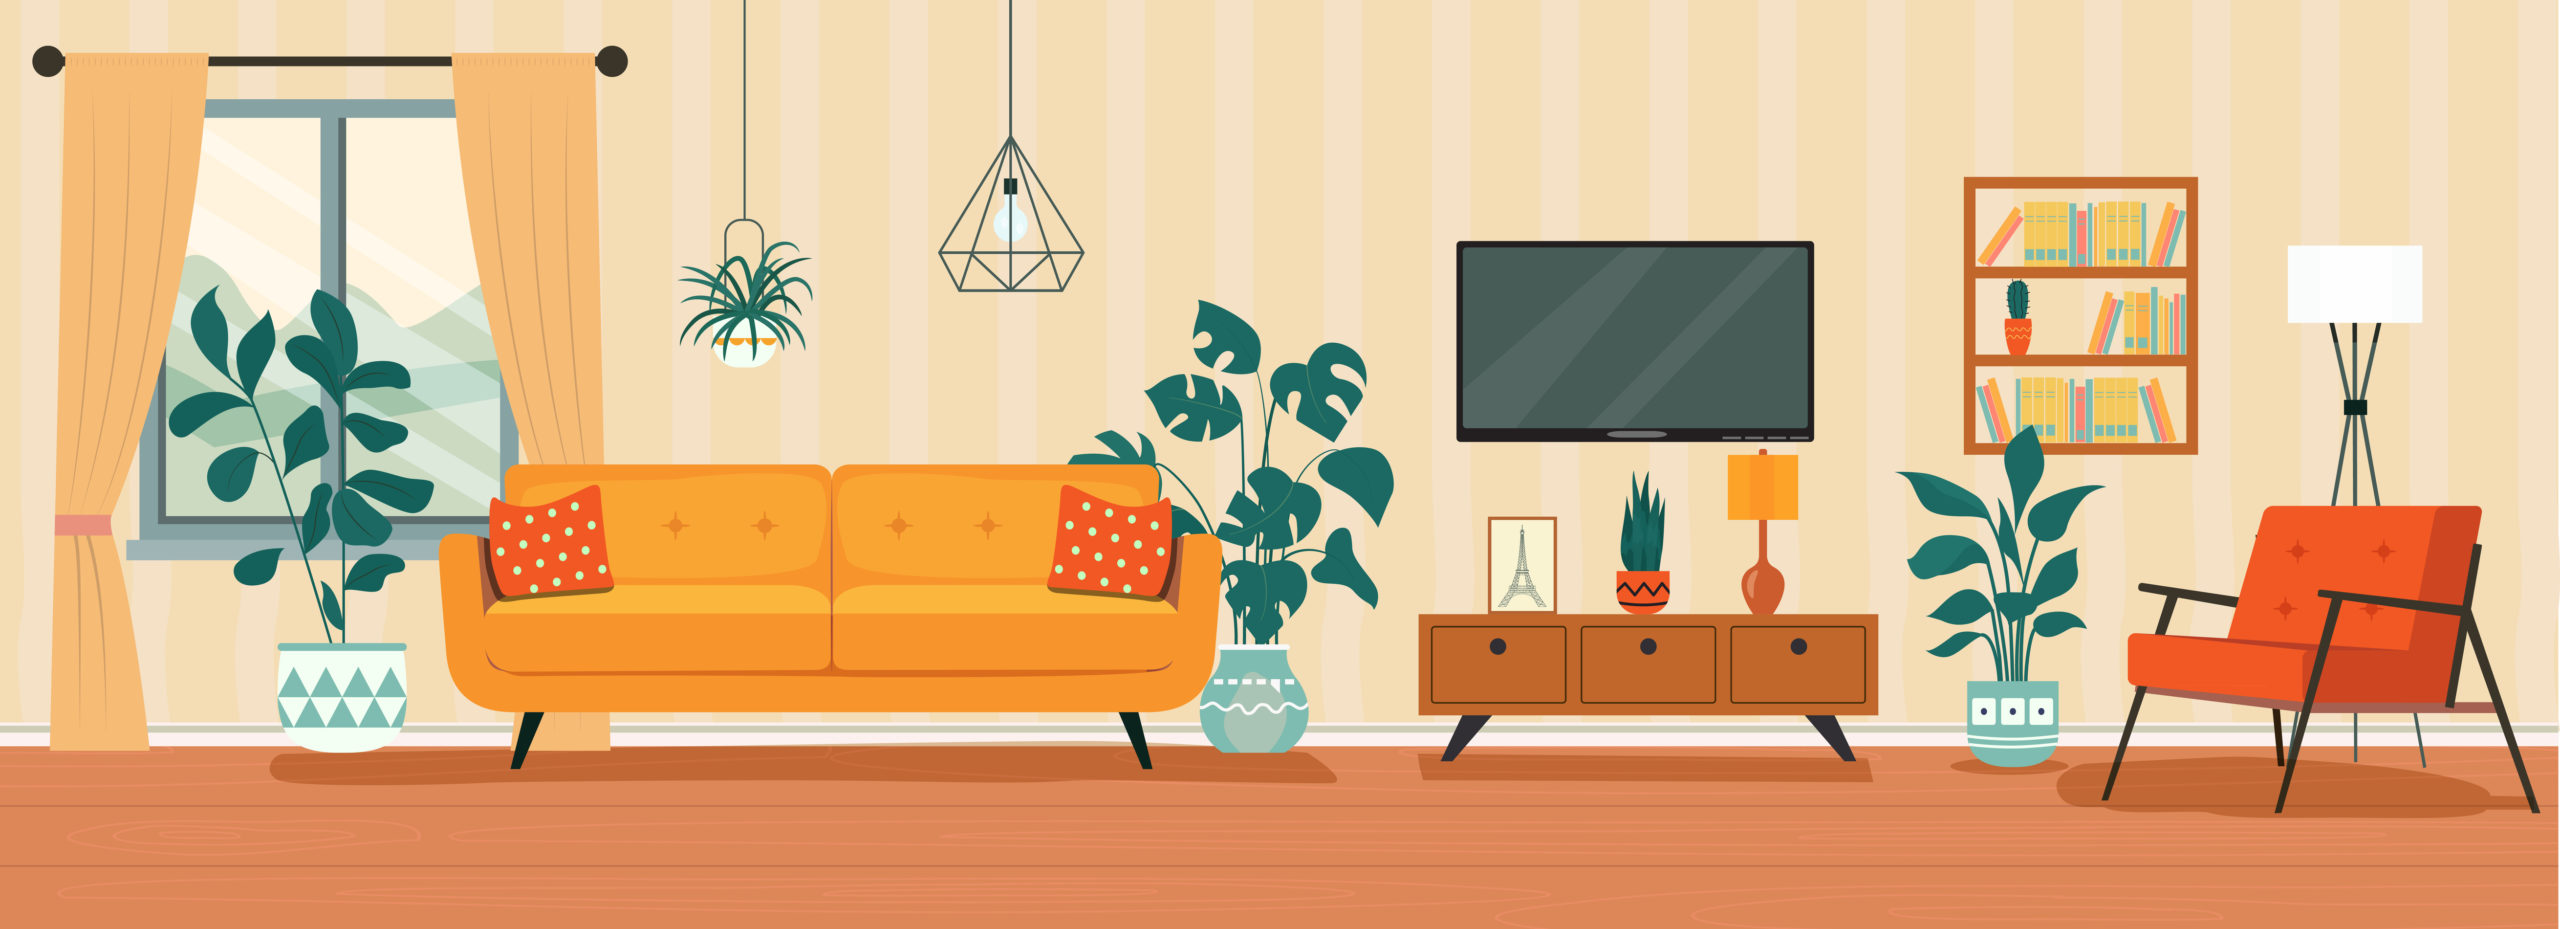 Well decorated living room illustration